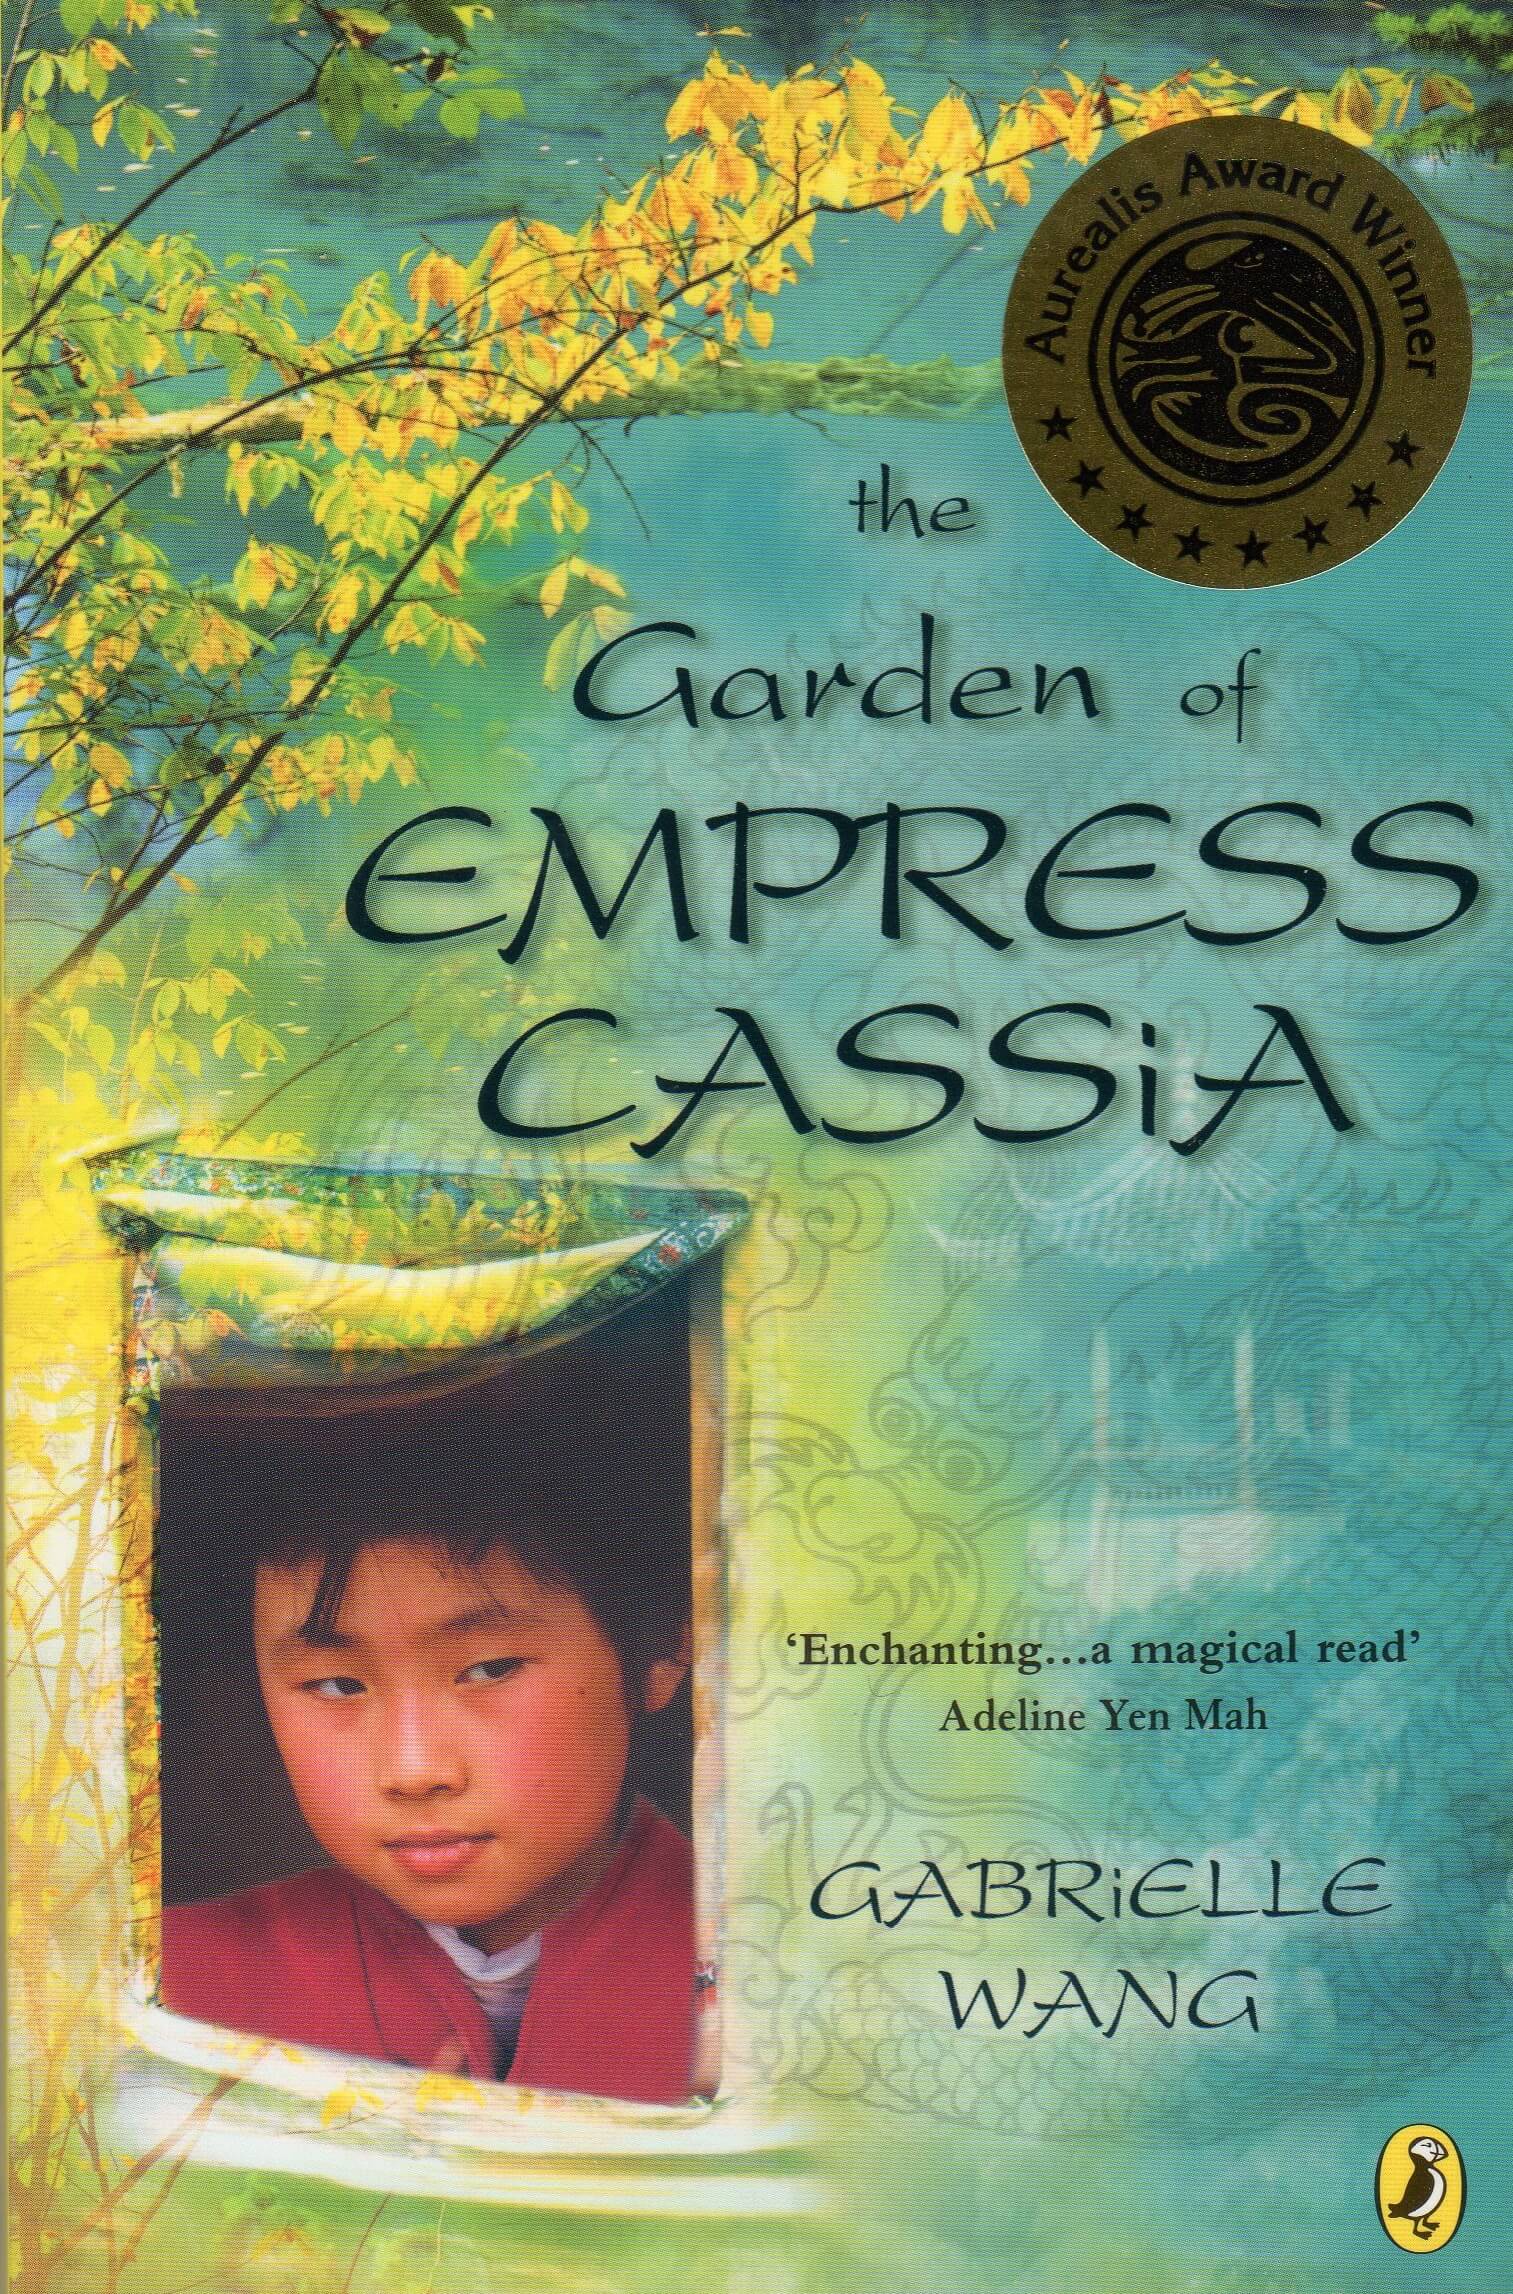 Gabrielle Wang's first book, The Garden of Empress Cassia, is loosely based on her childhood.